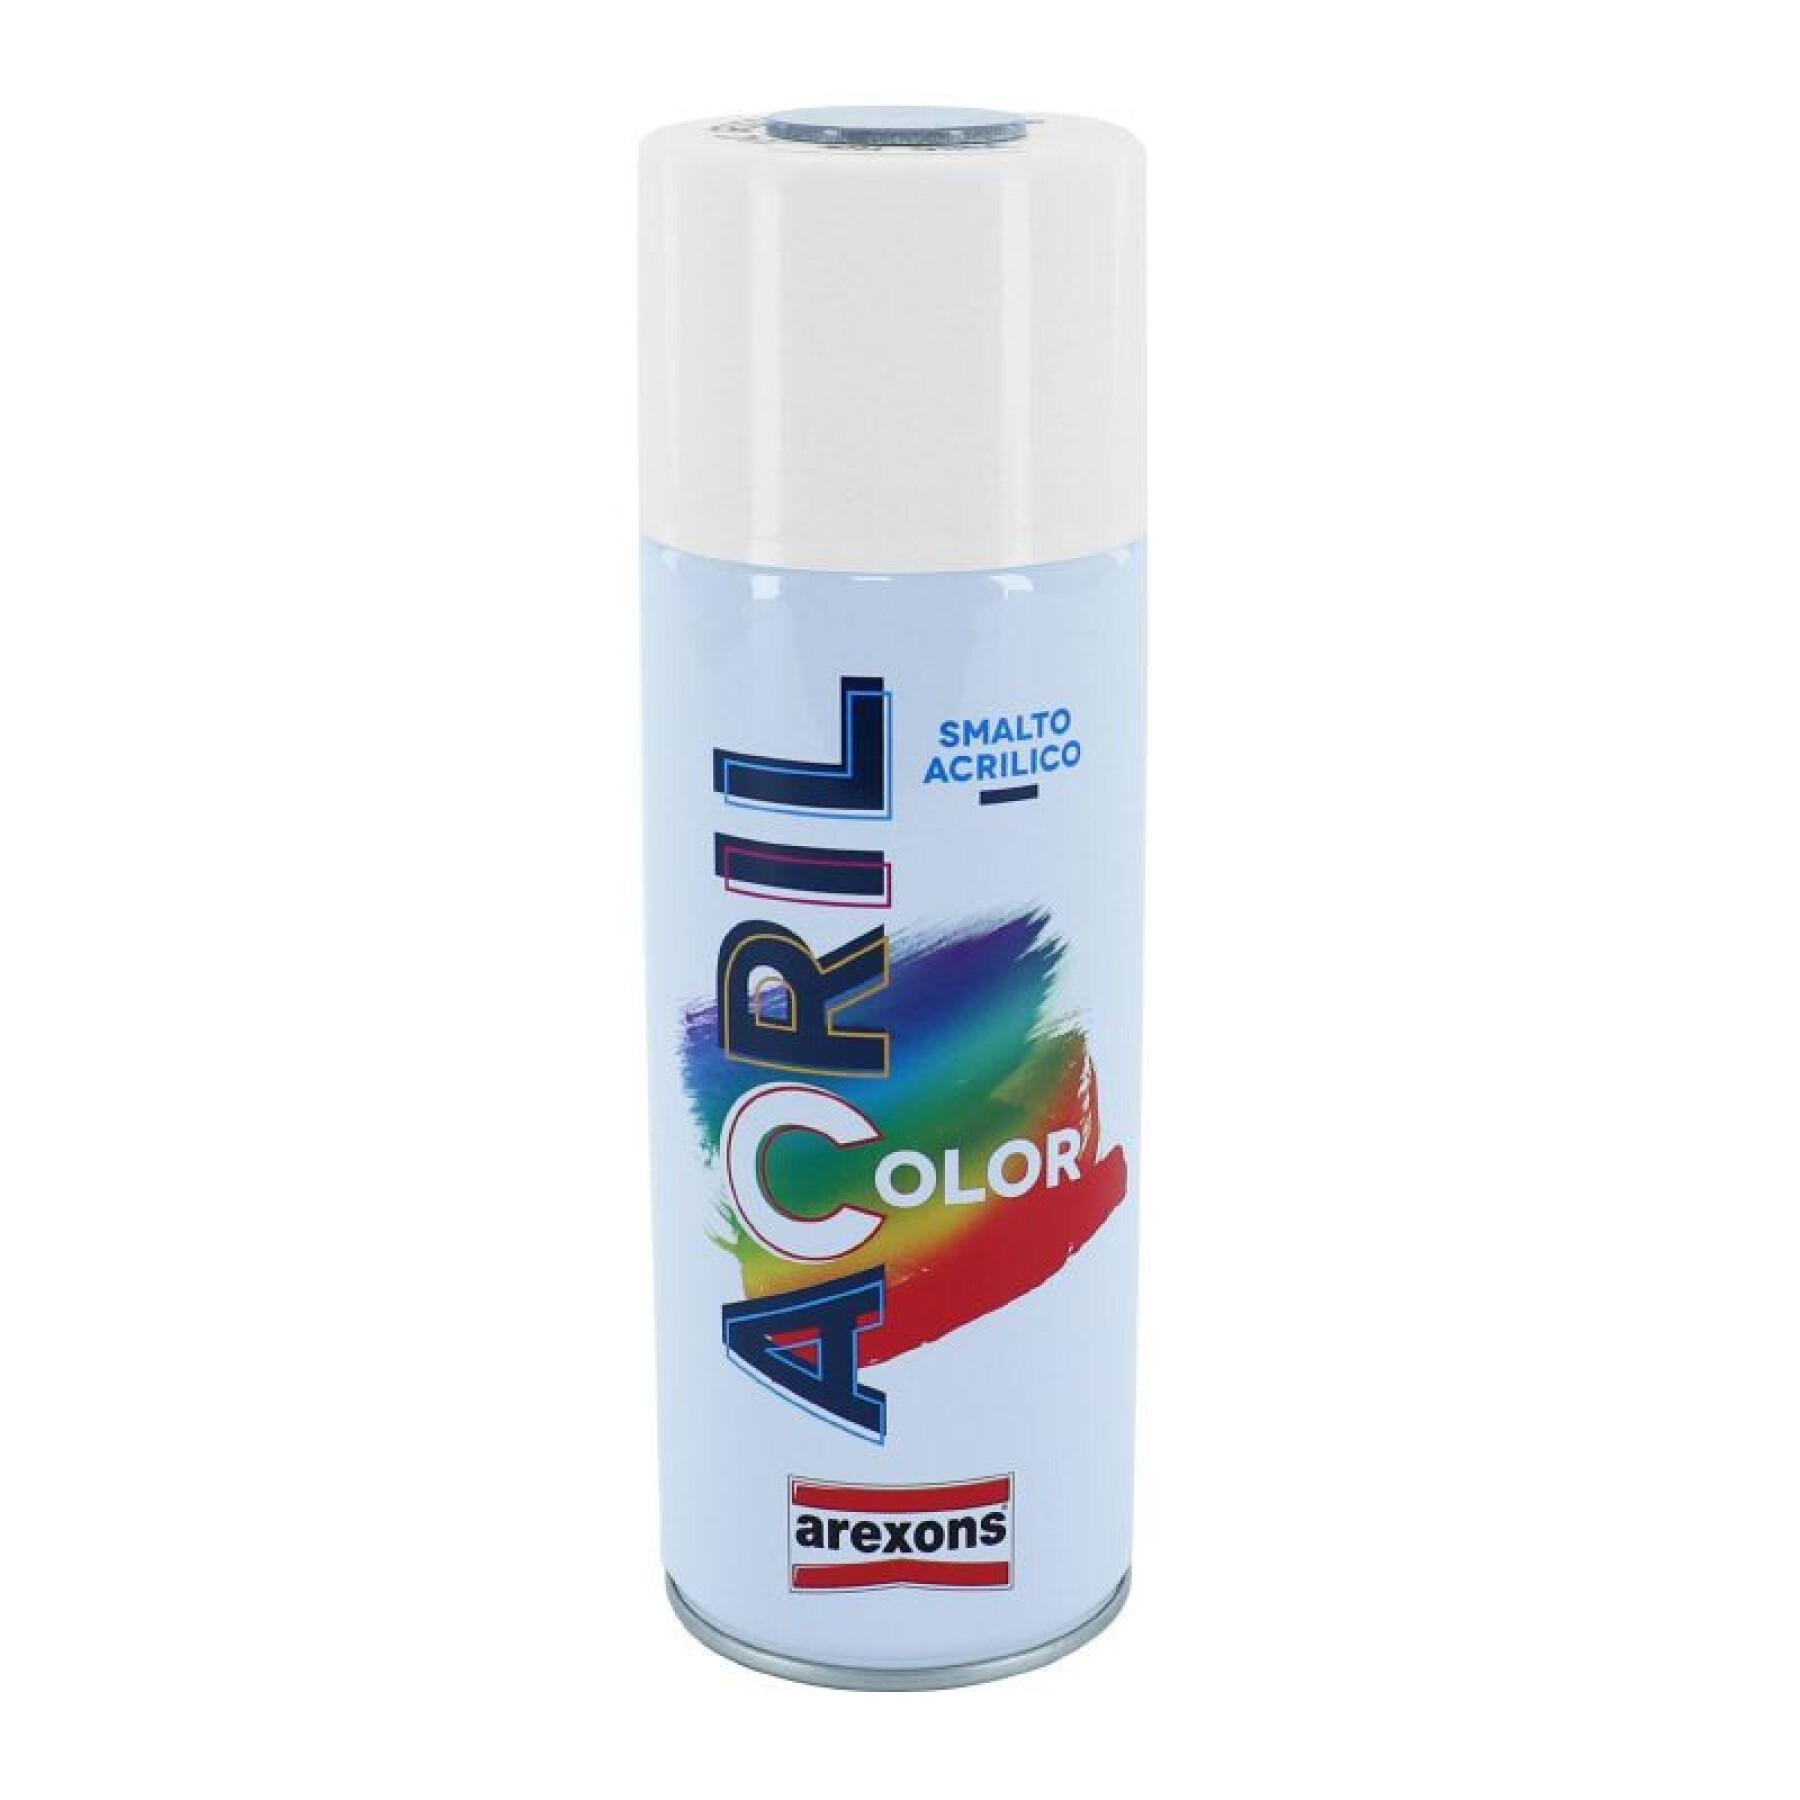 Acrylic aerosol paint can Arexons Ral 7042